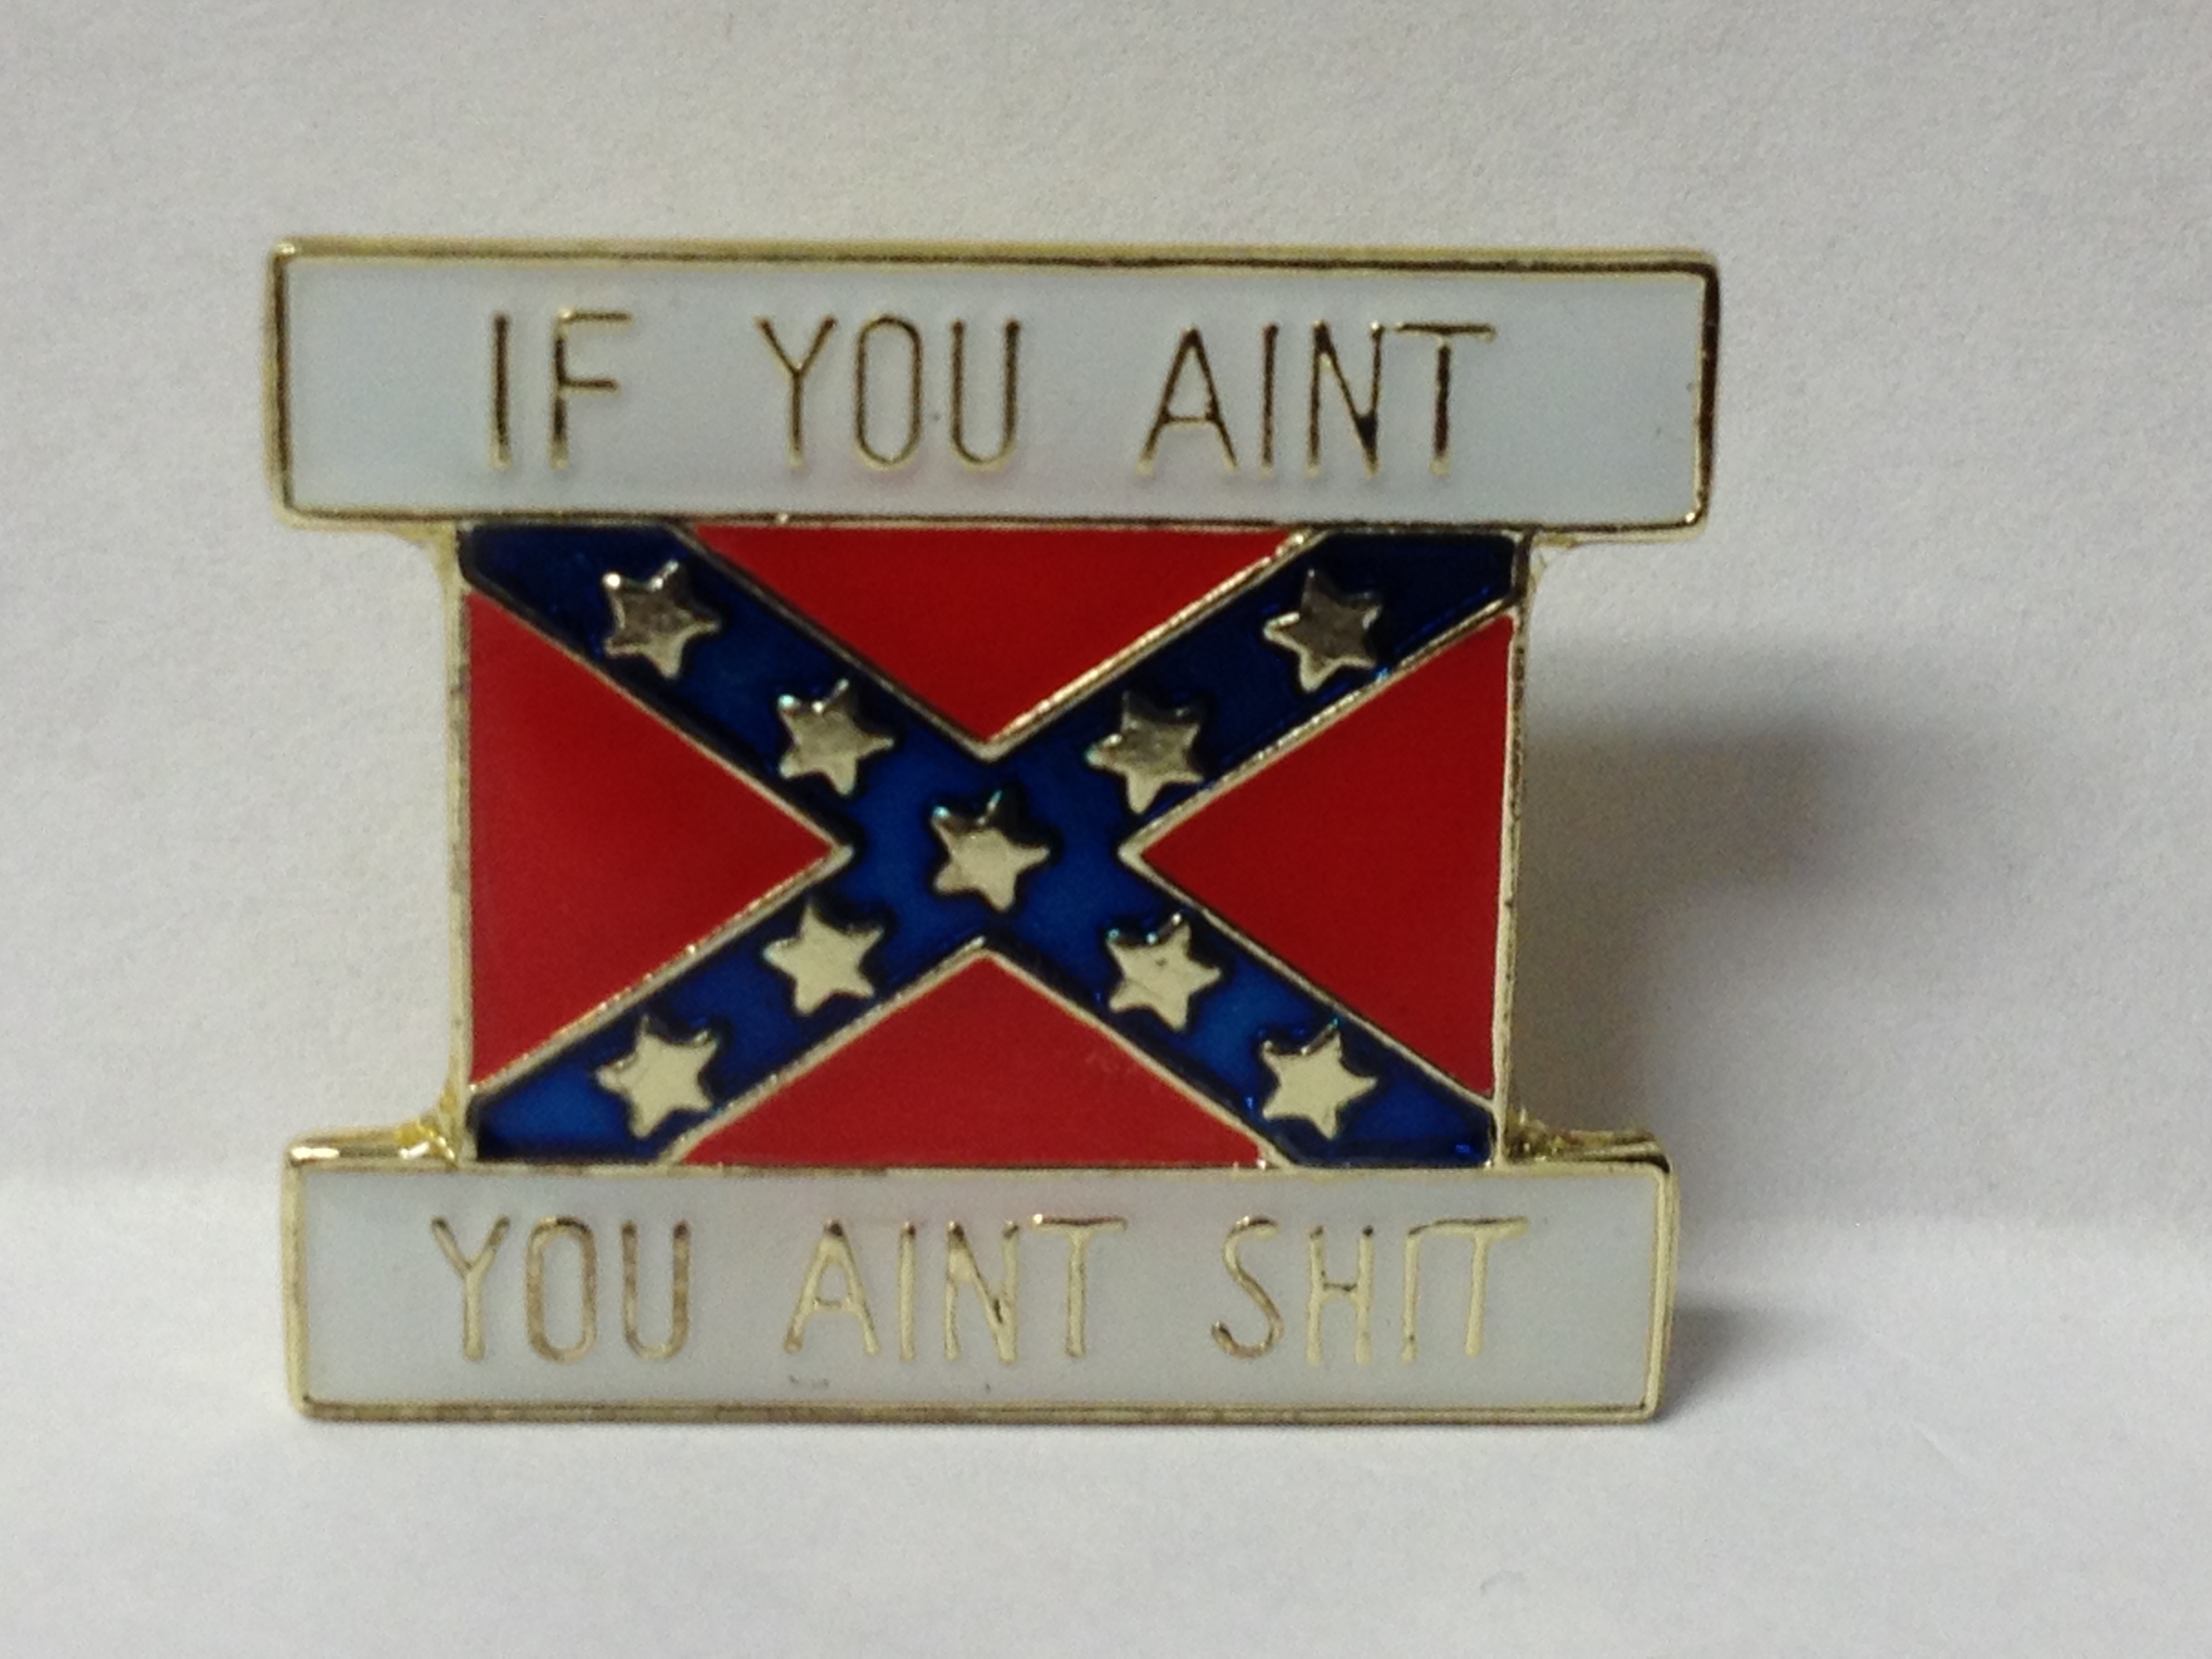 IF YOU AINT A COWBOY YOU AINT SH!T FUNNY LAPEL PIN BADGE 1 INCH